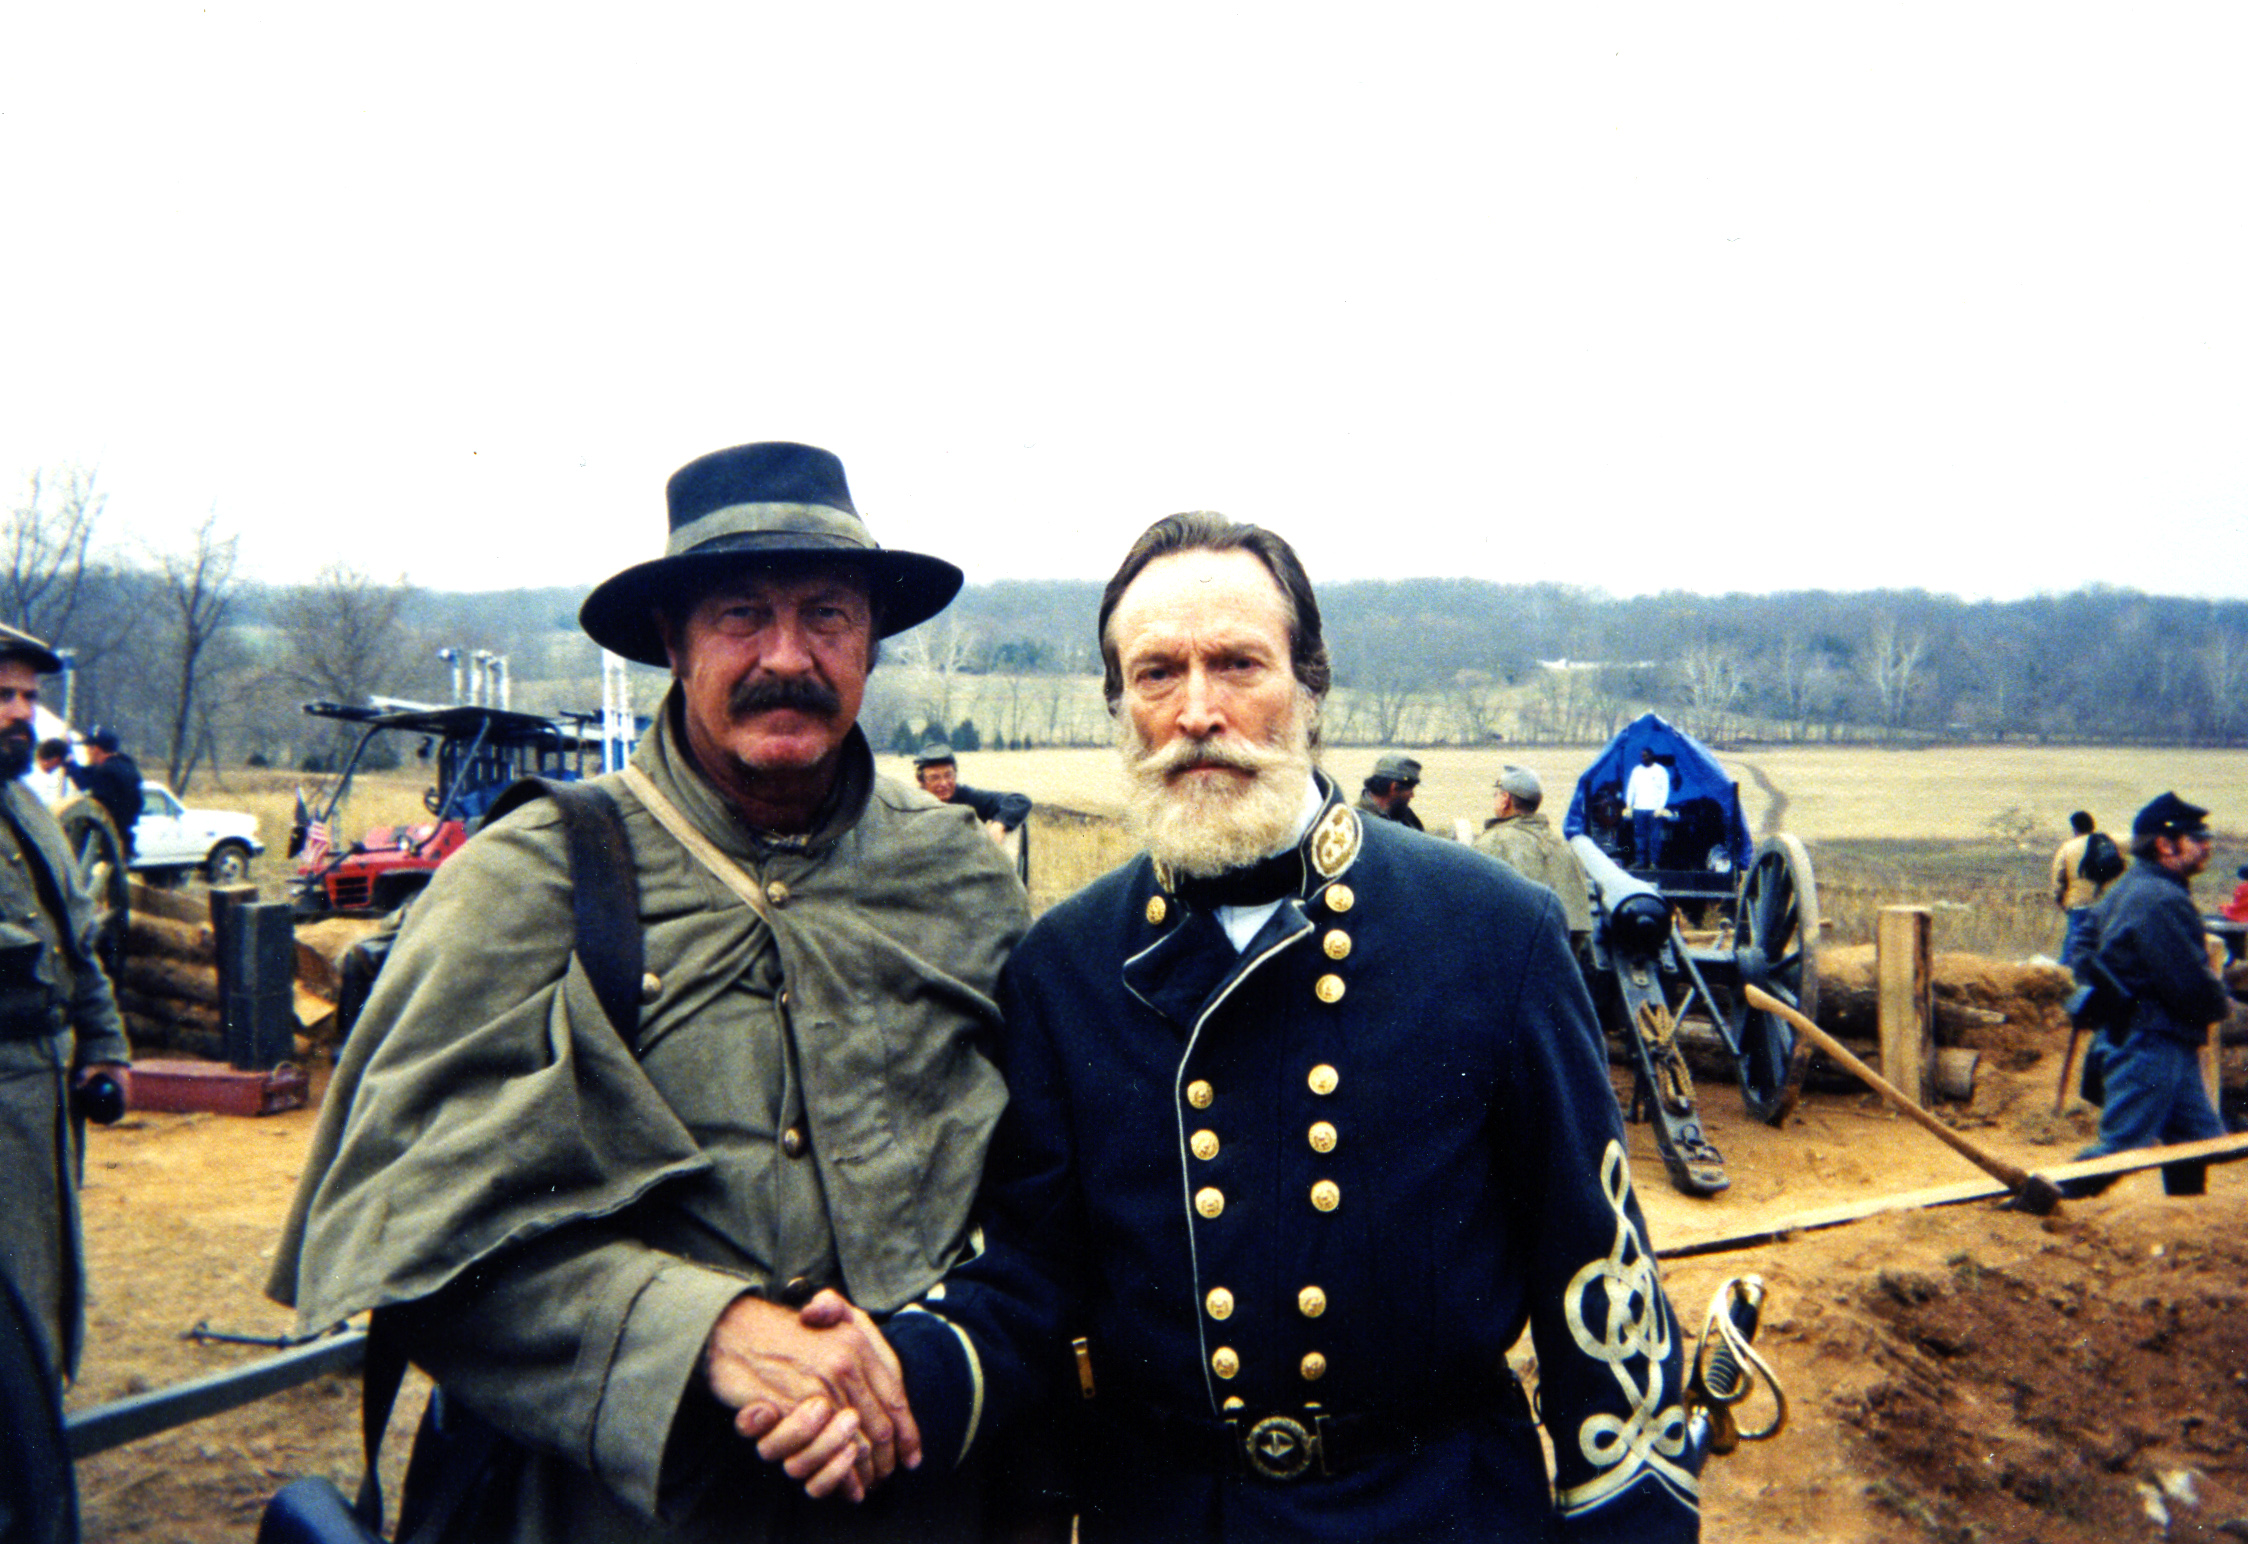 Tom Thompson and Patrick Gorman on the set of 'Gods and Generals'.